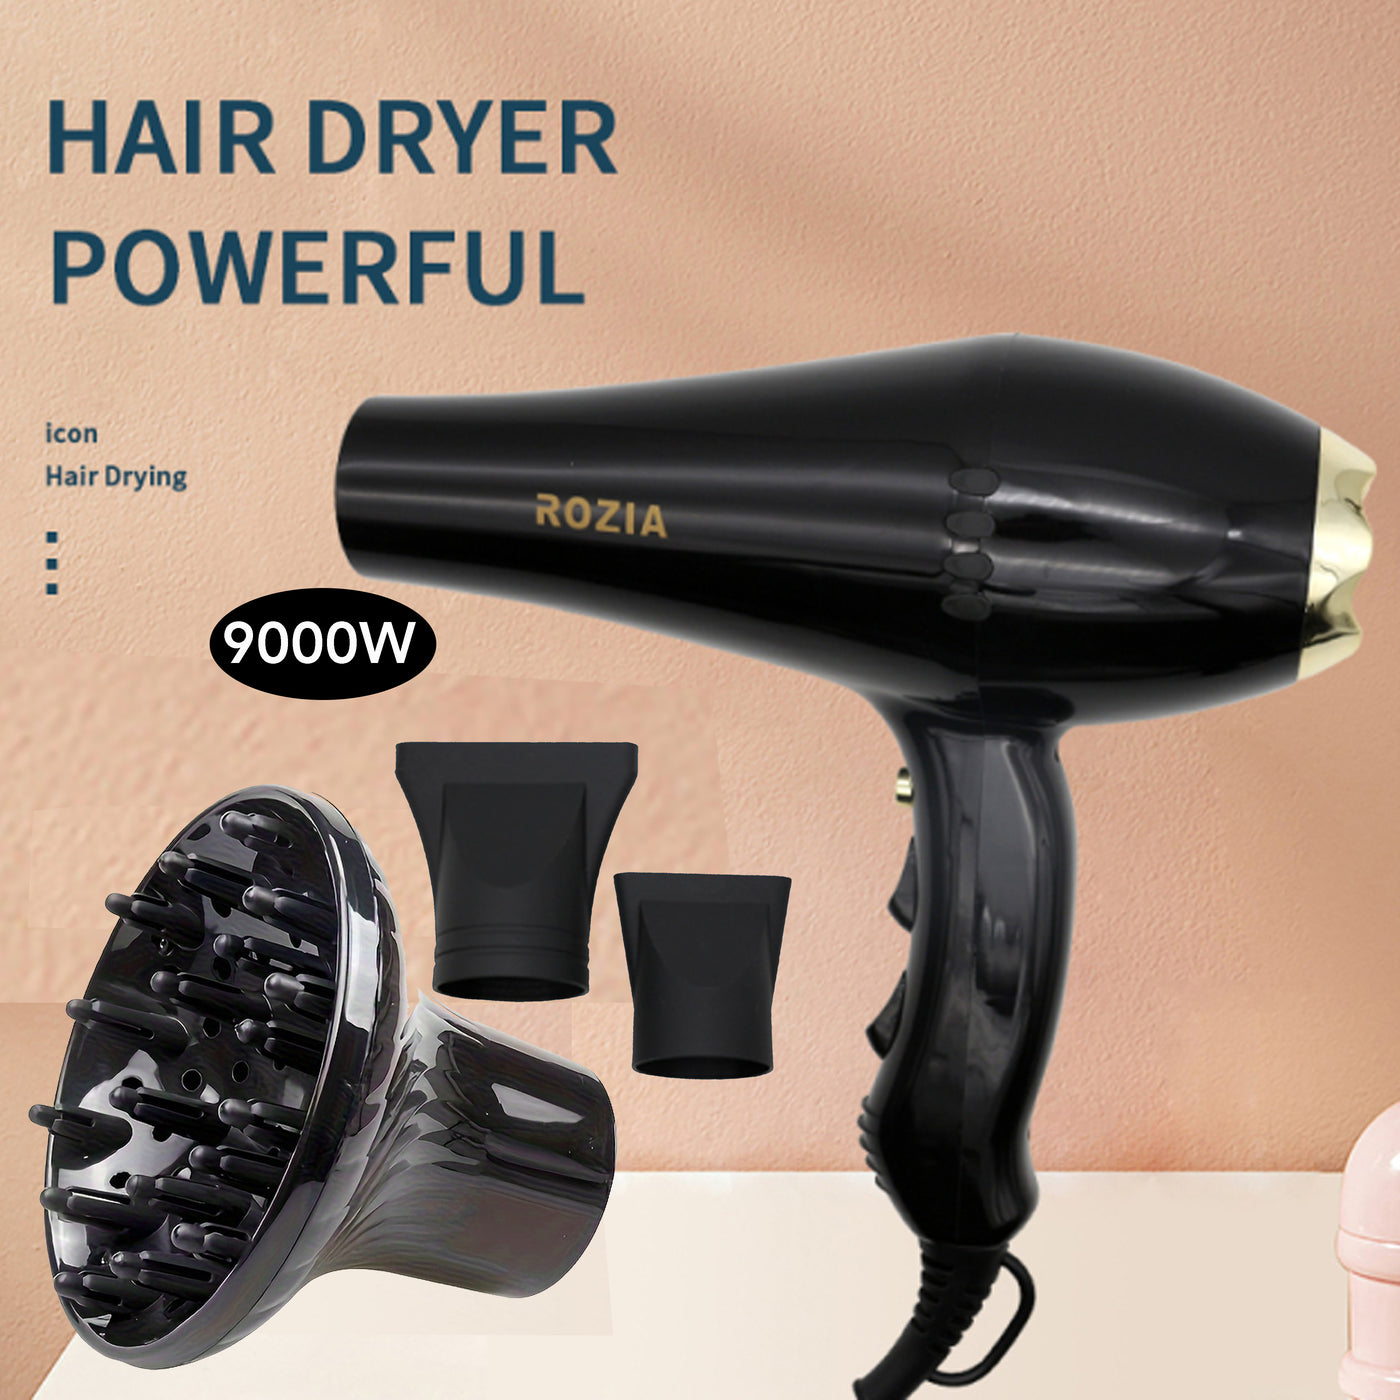 Rozia professional Hair Dryer 9000W with Diffuser